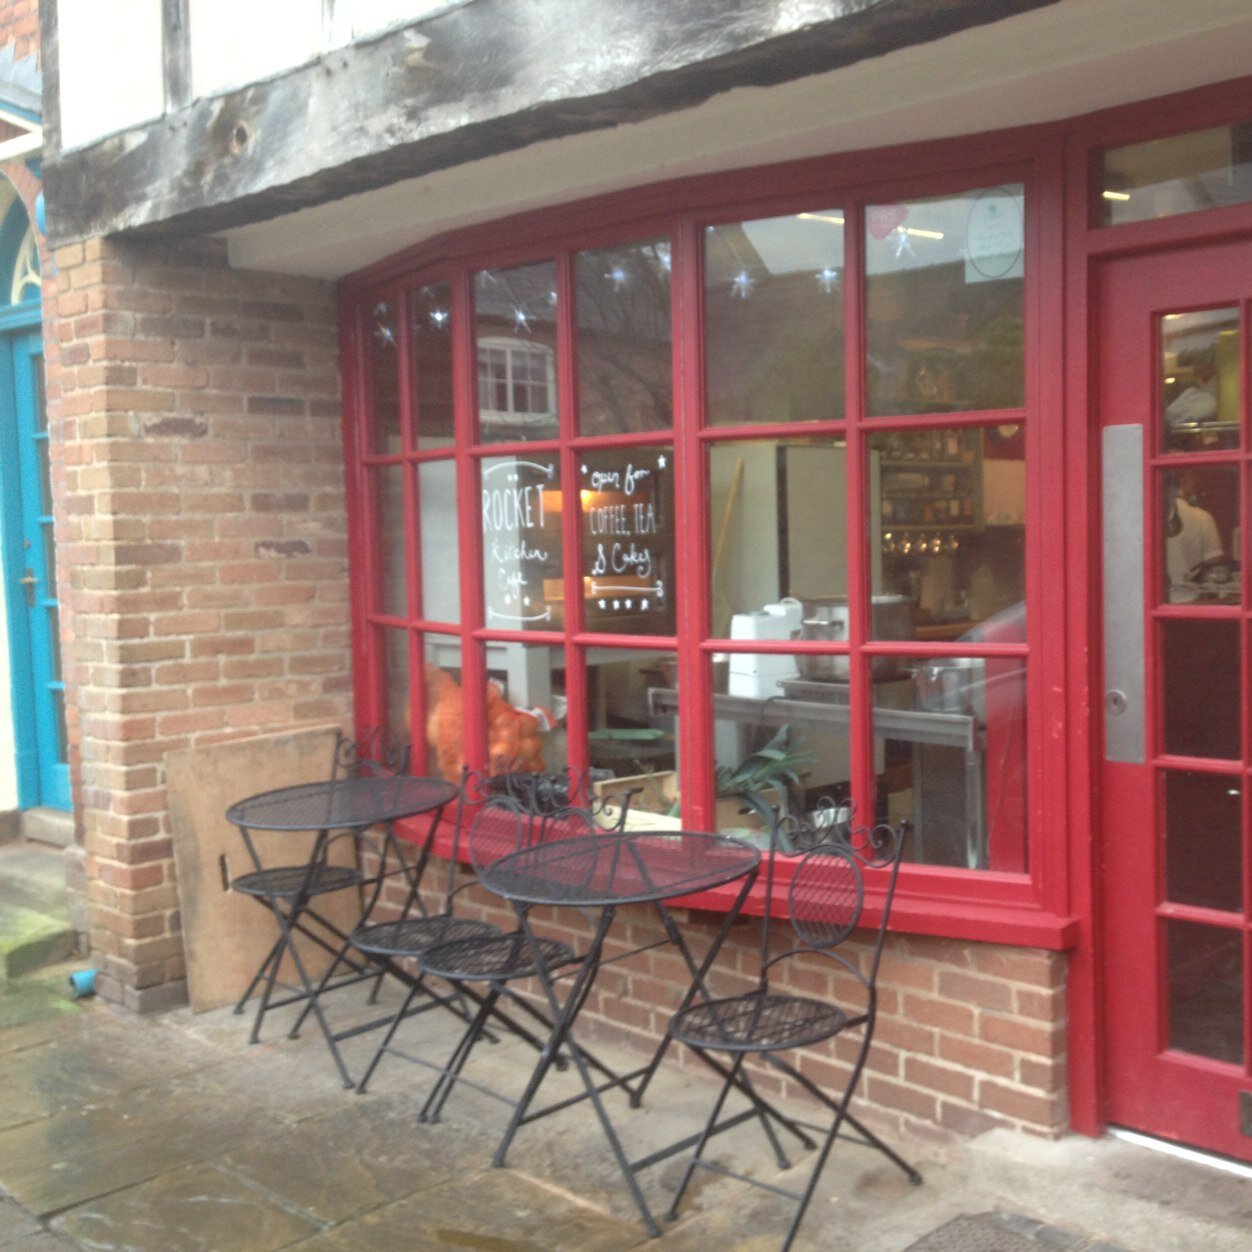 church street Hereford organic locally sourced food cafe & cater for events and weddings..